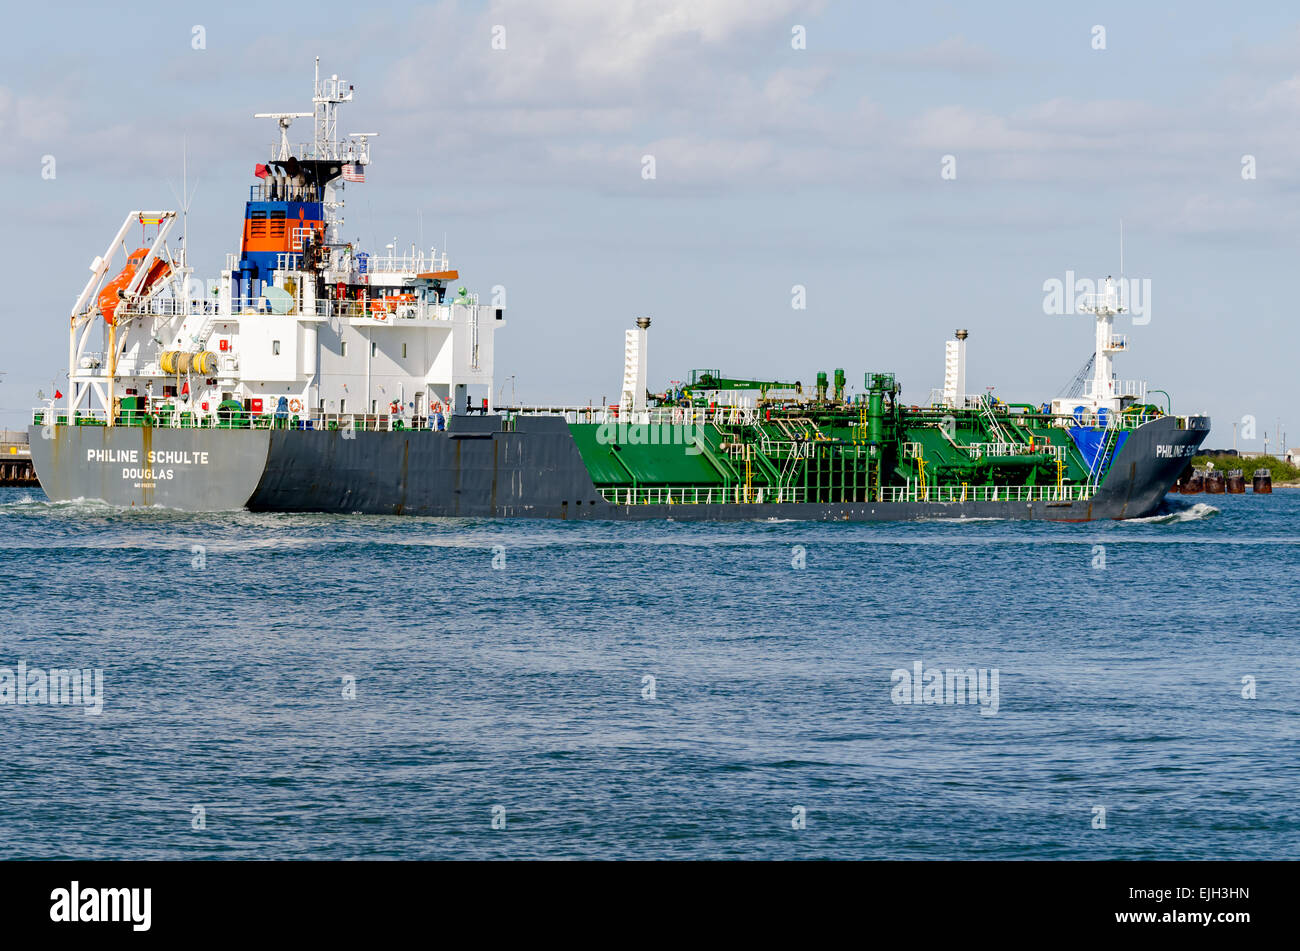 The LNG tanker PHILINE SCHULTE whose home port is ISLE OF MAN in the UK is shown in the Corpus Christi ship channel Stock Photo